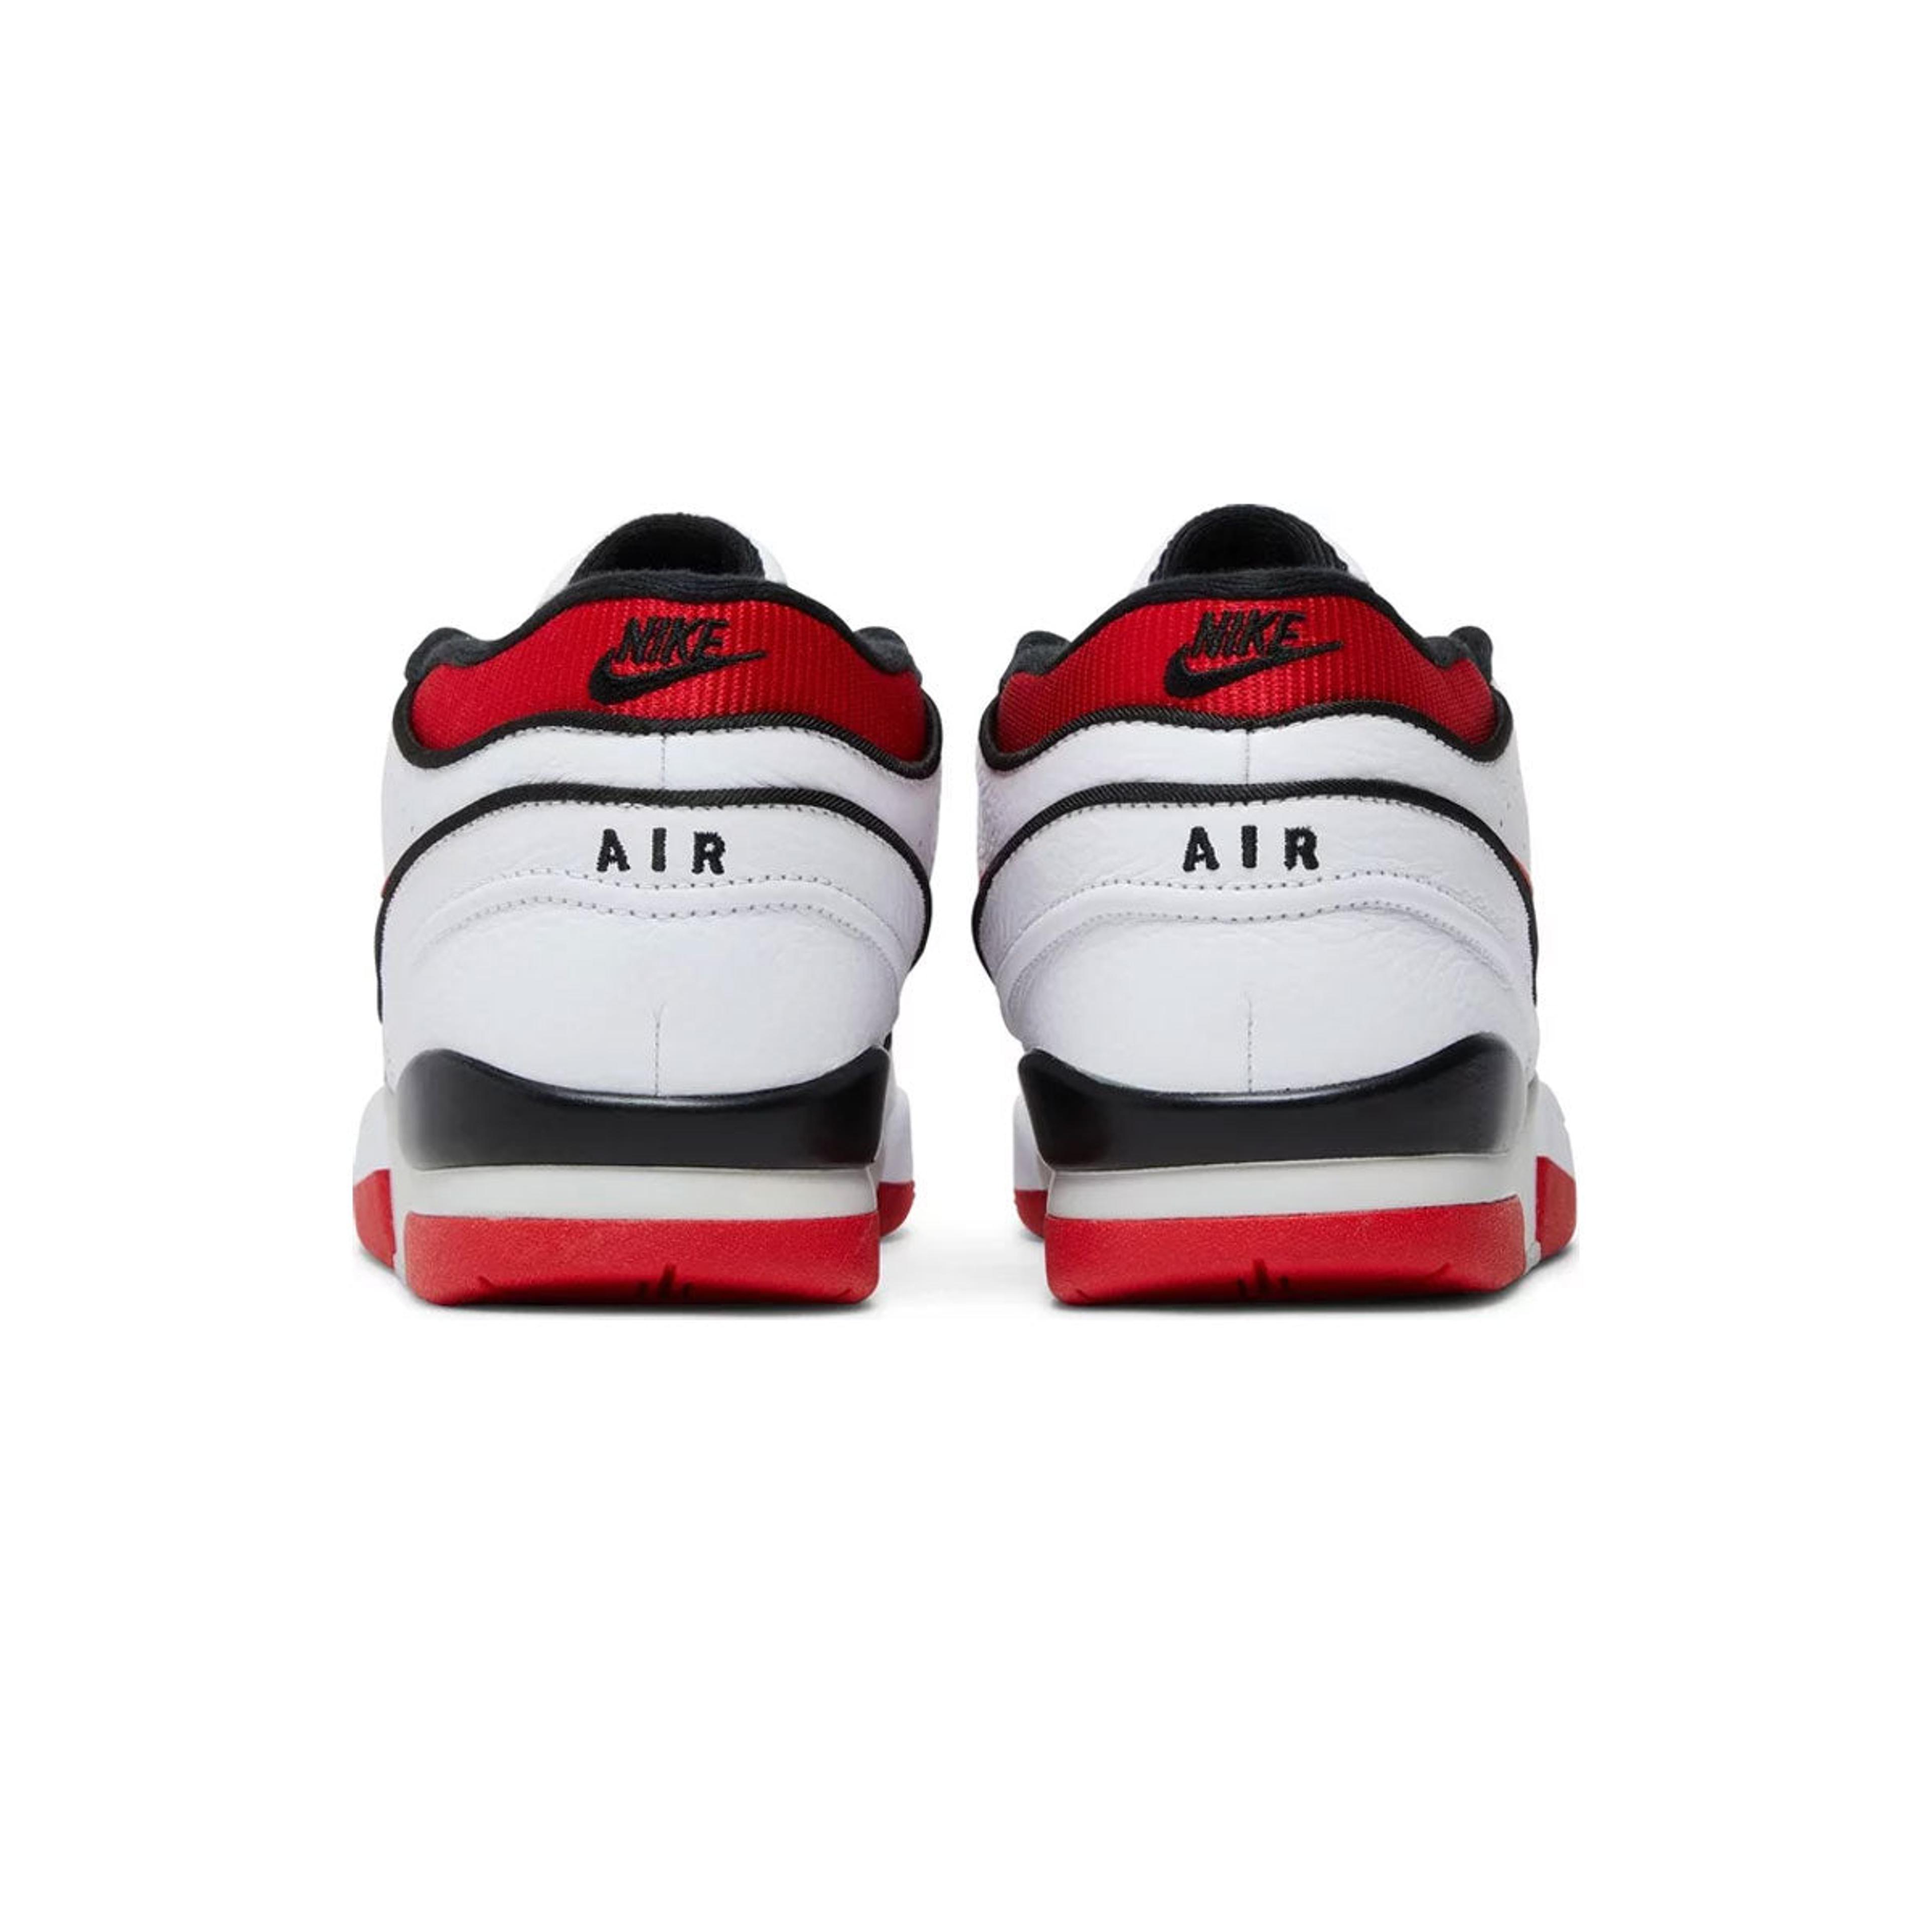 Alternate View 4 of Nike Air Alpha Force 88 University Red